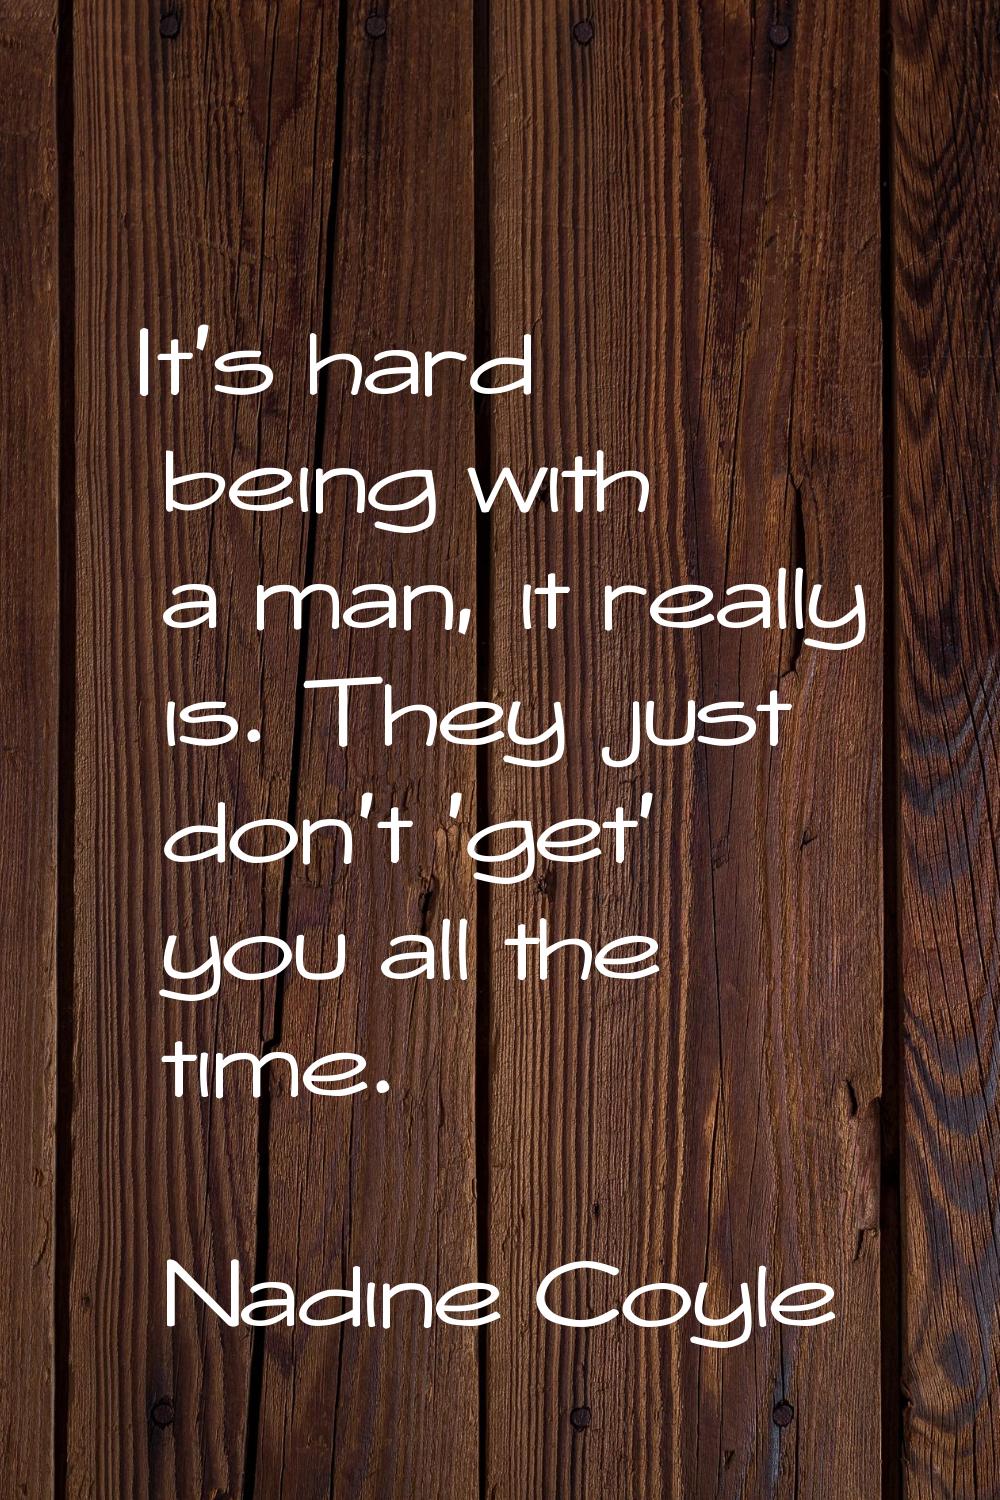 It's hard being with a man, it really is. They just don't 'get' you all the time.